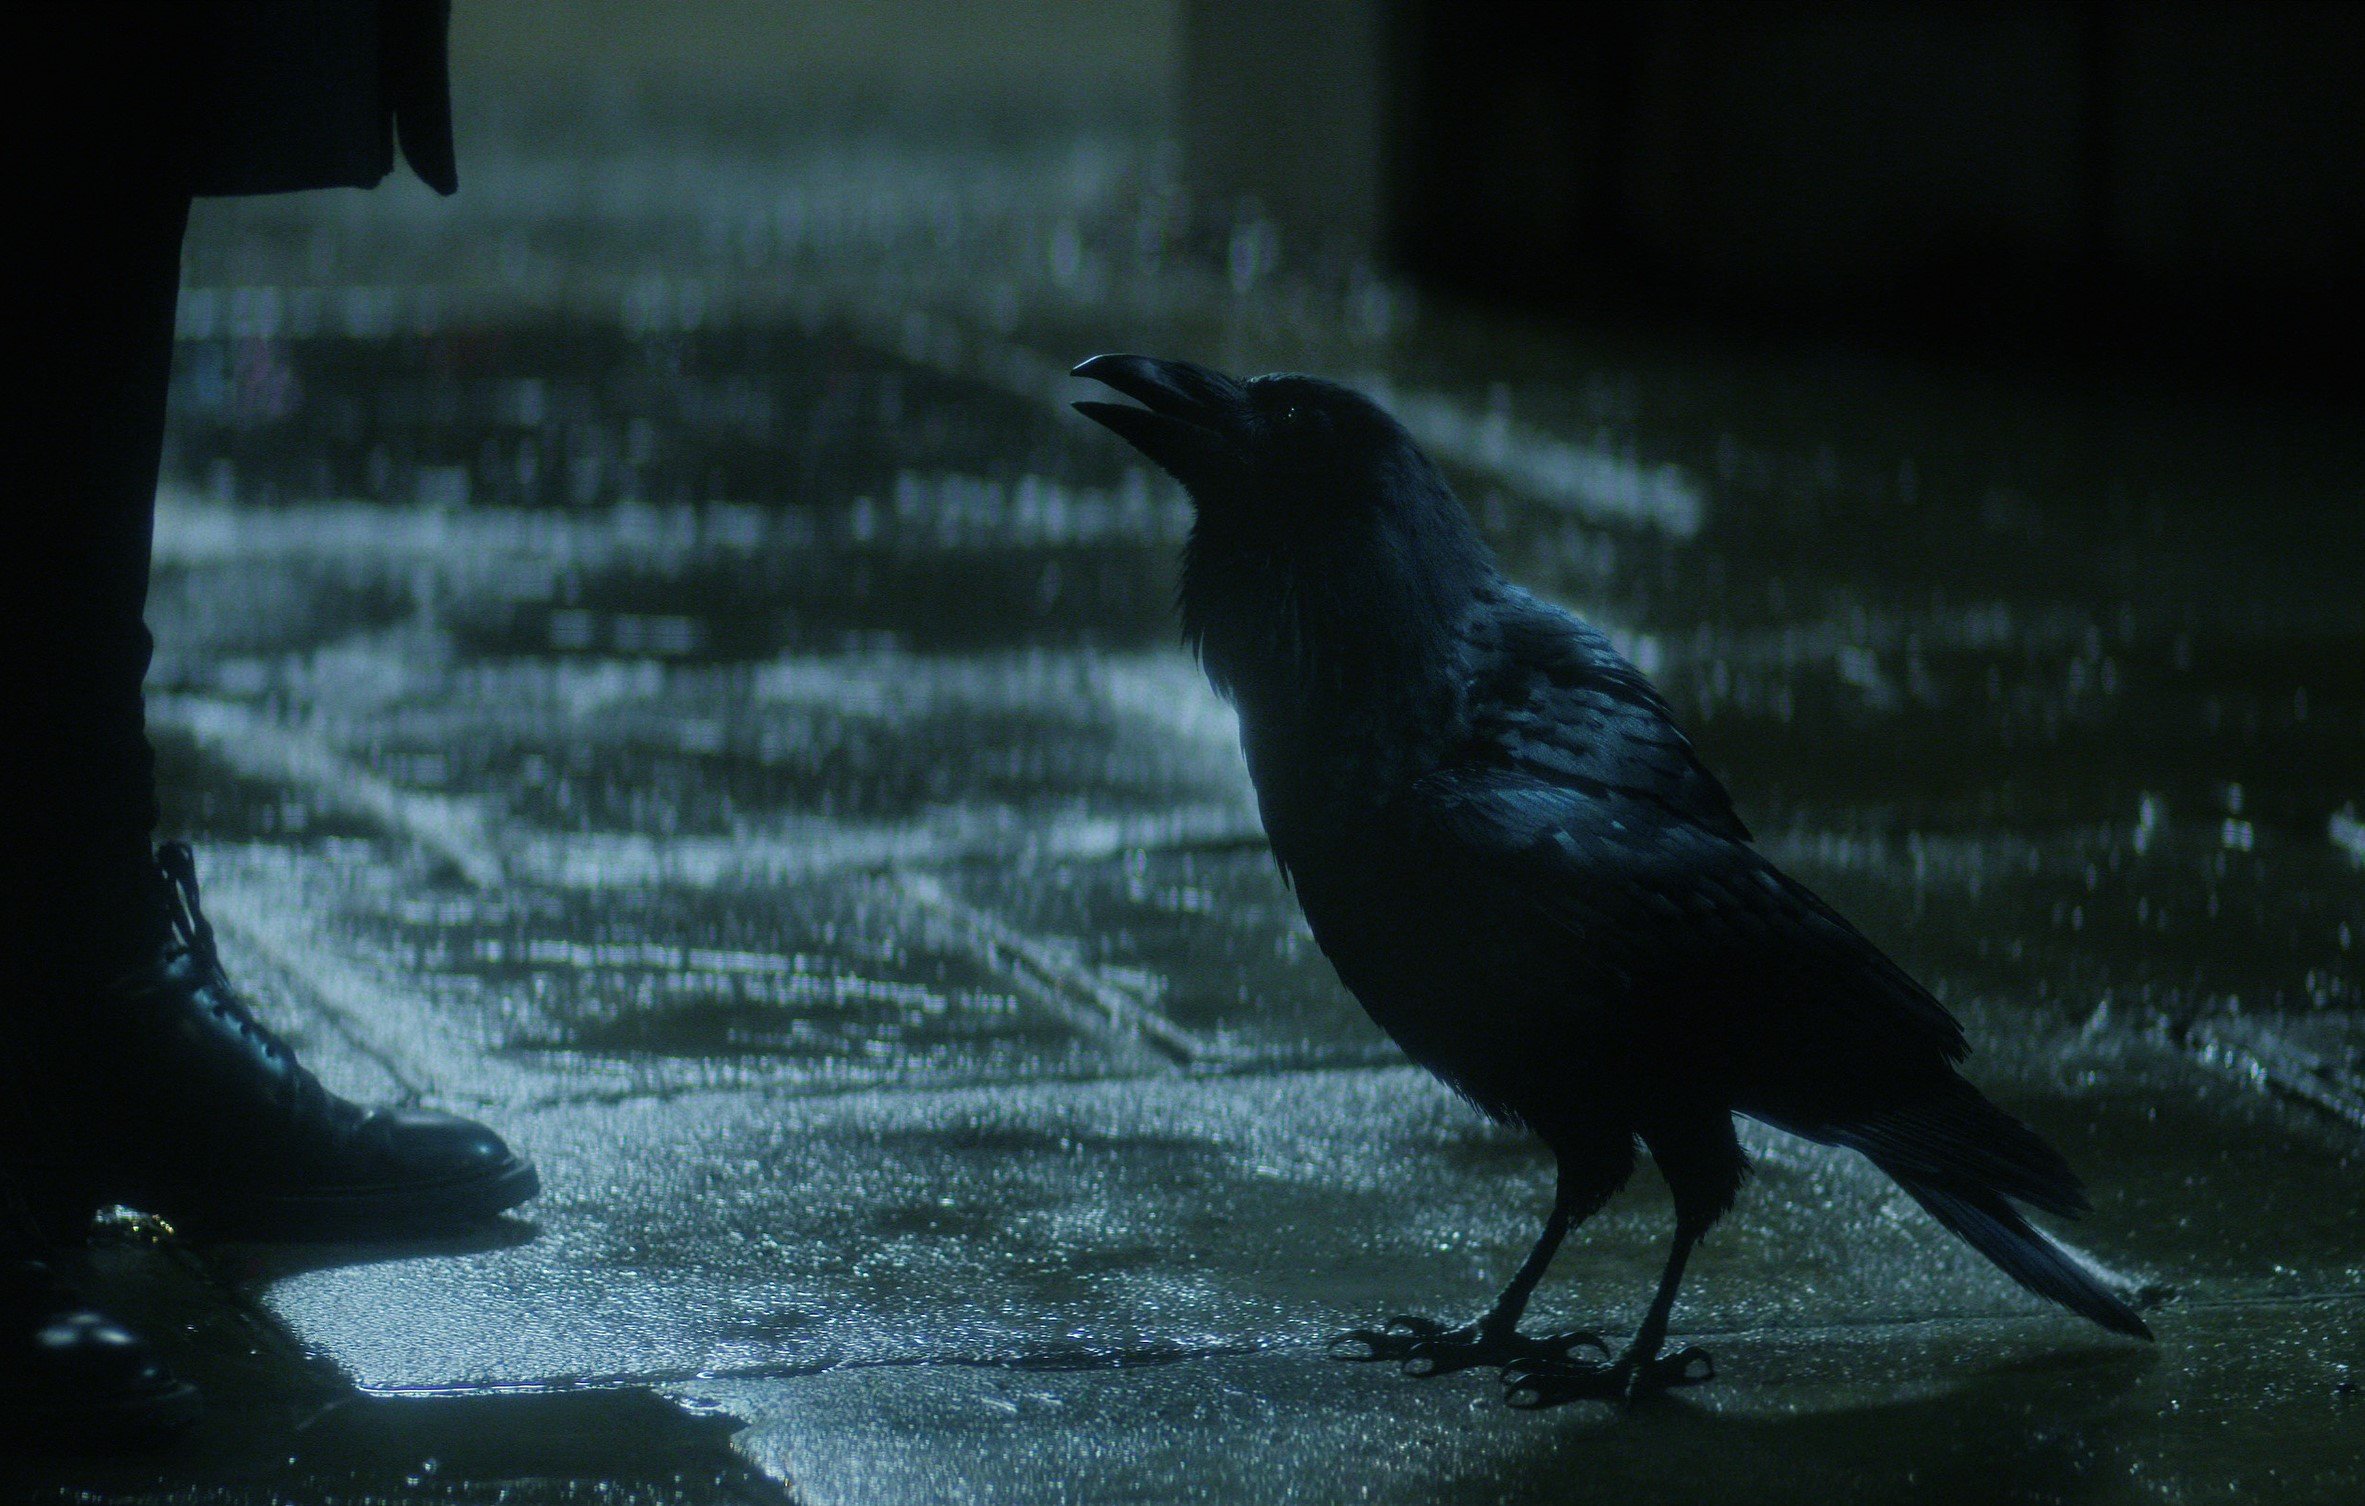 Matthew in 'The Sandman,' who is a raven voiced by Patton Oswalt. The raven is looking up at a man whose feet can be seen in the photo.